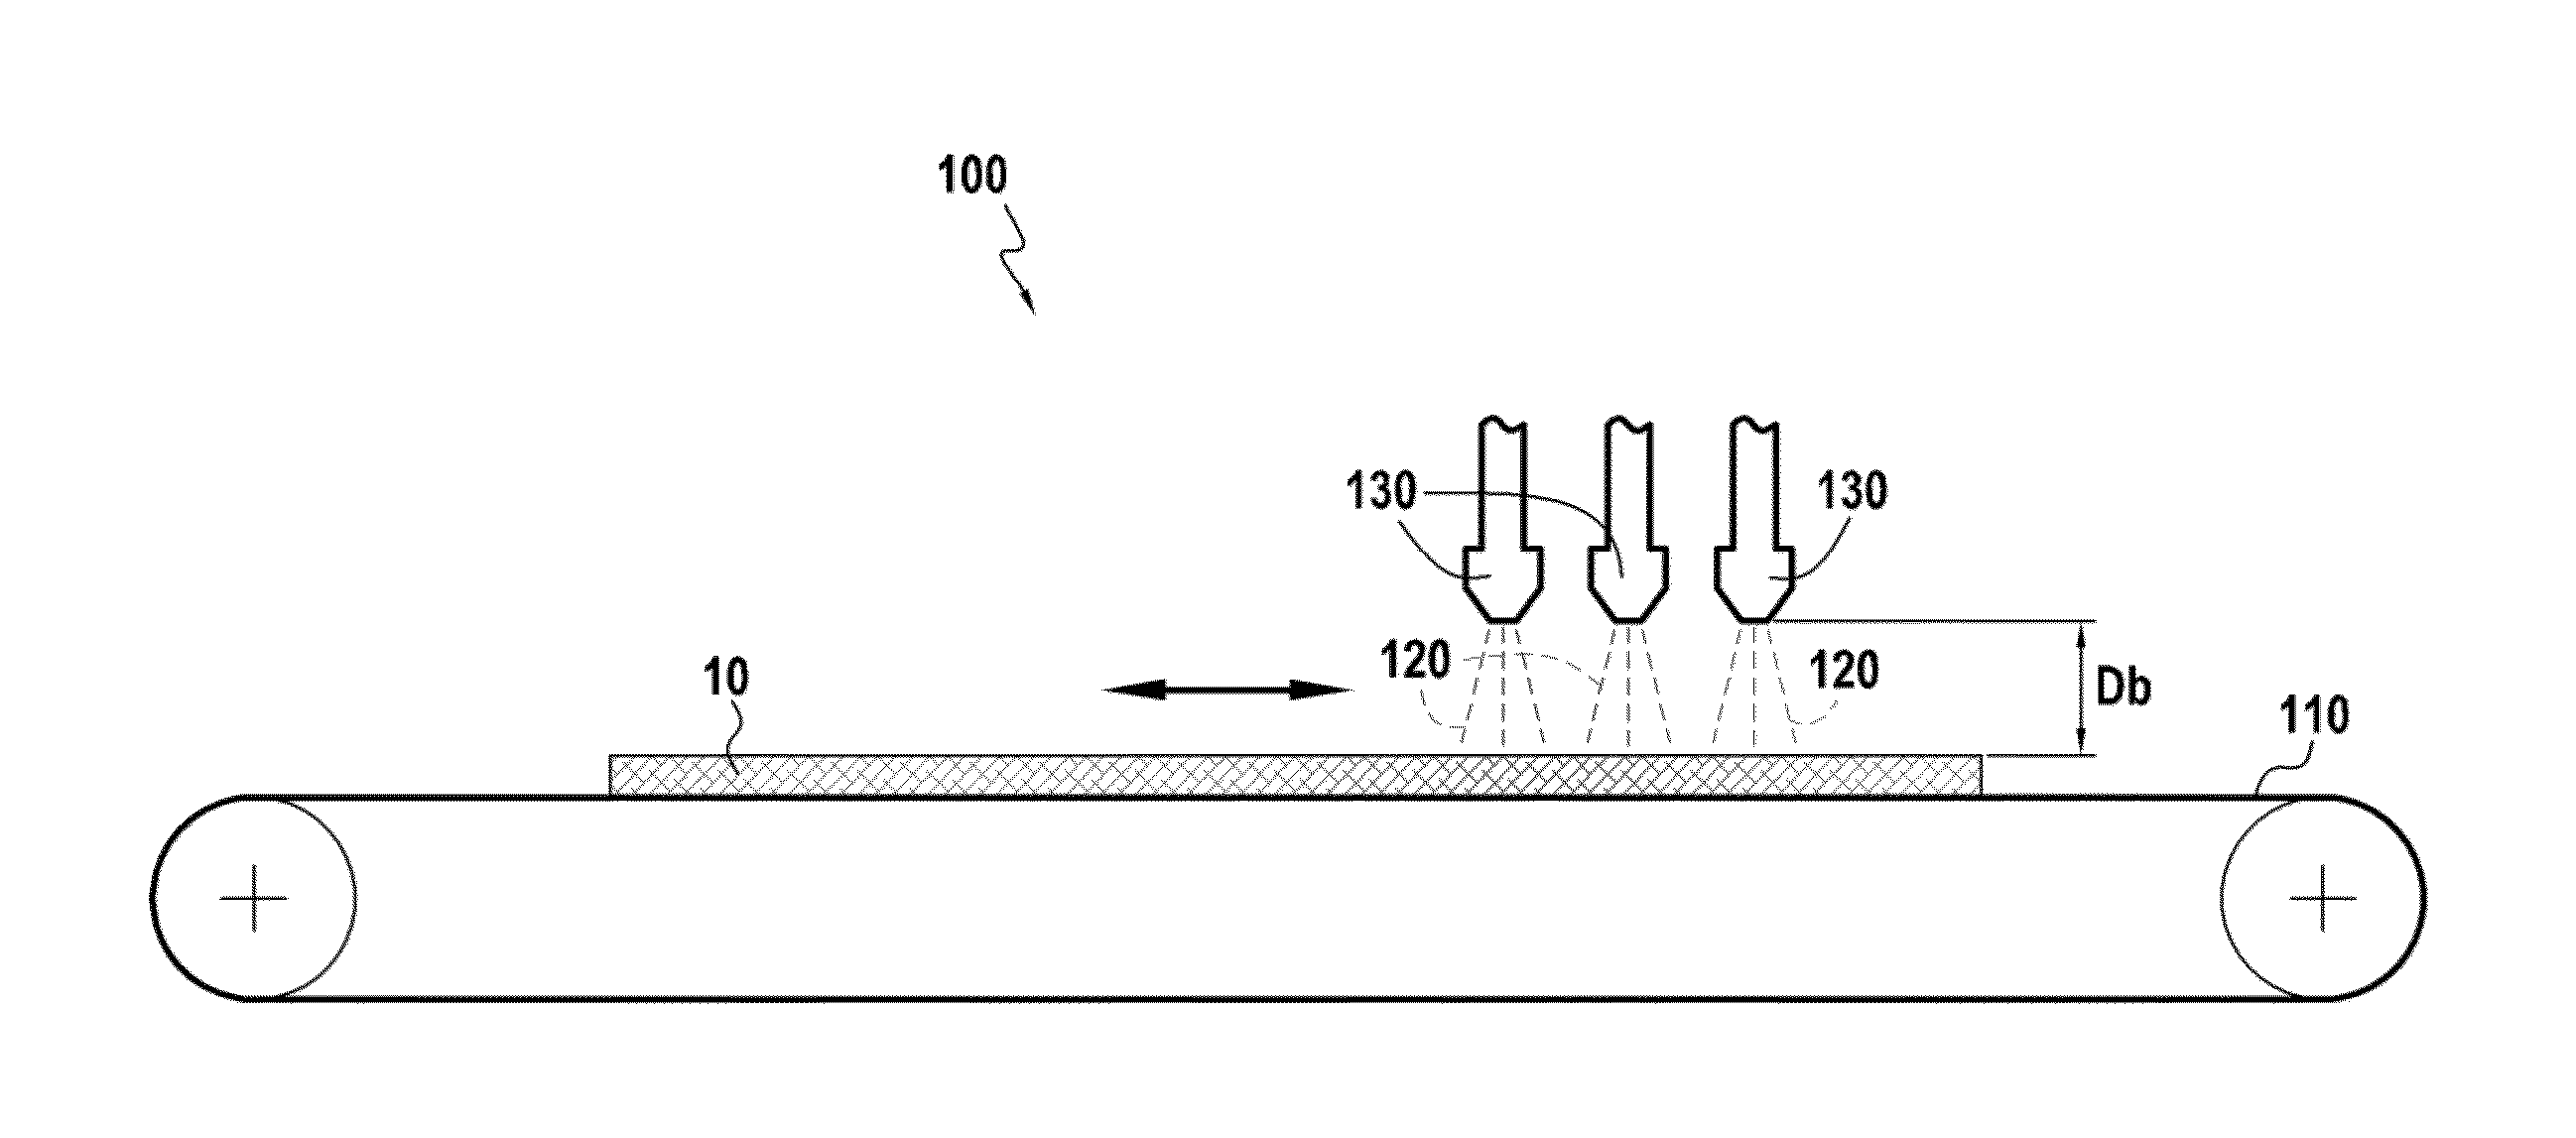 Method of fabricating a composite material part with improved intra-yarn densification